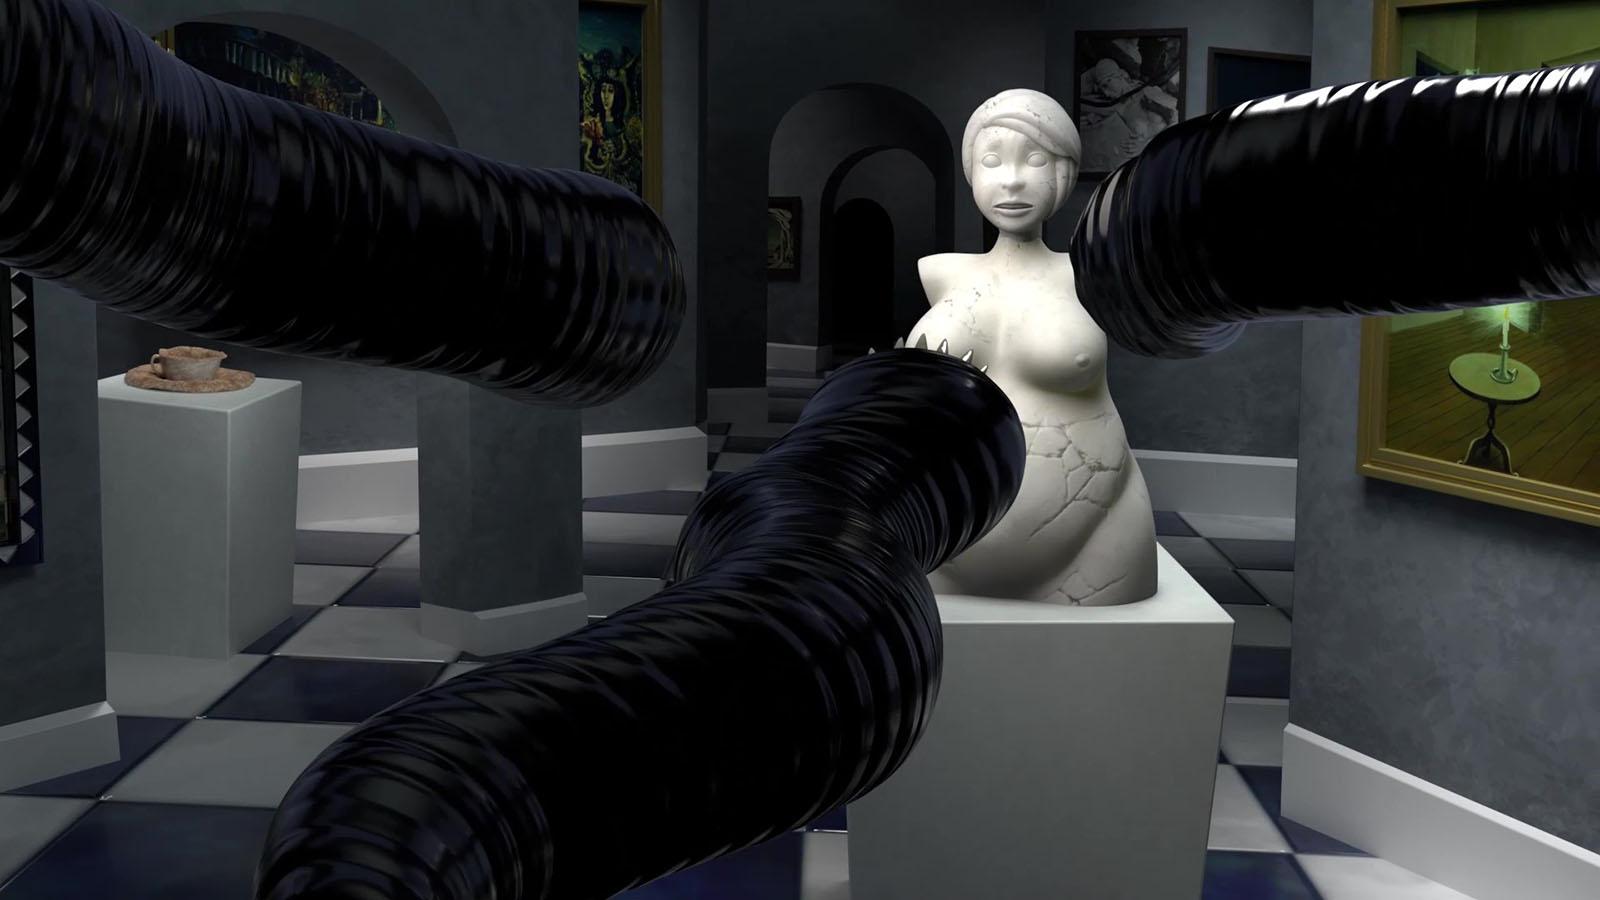 Statue of a woman in a museum with black tentacle-like forms in the foreground